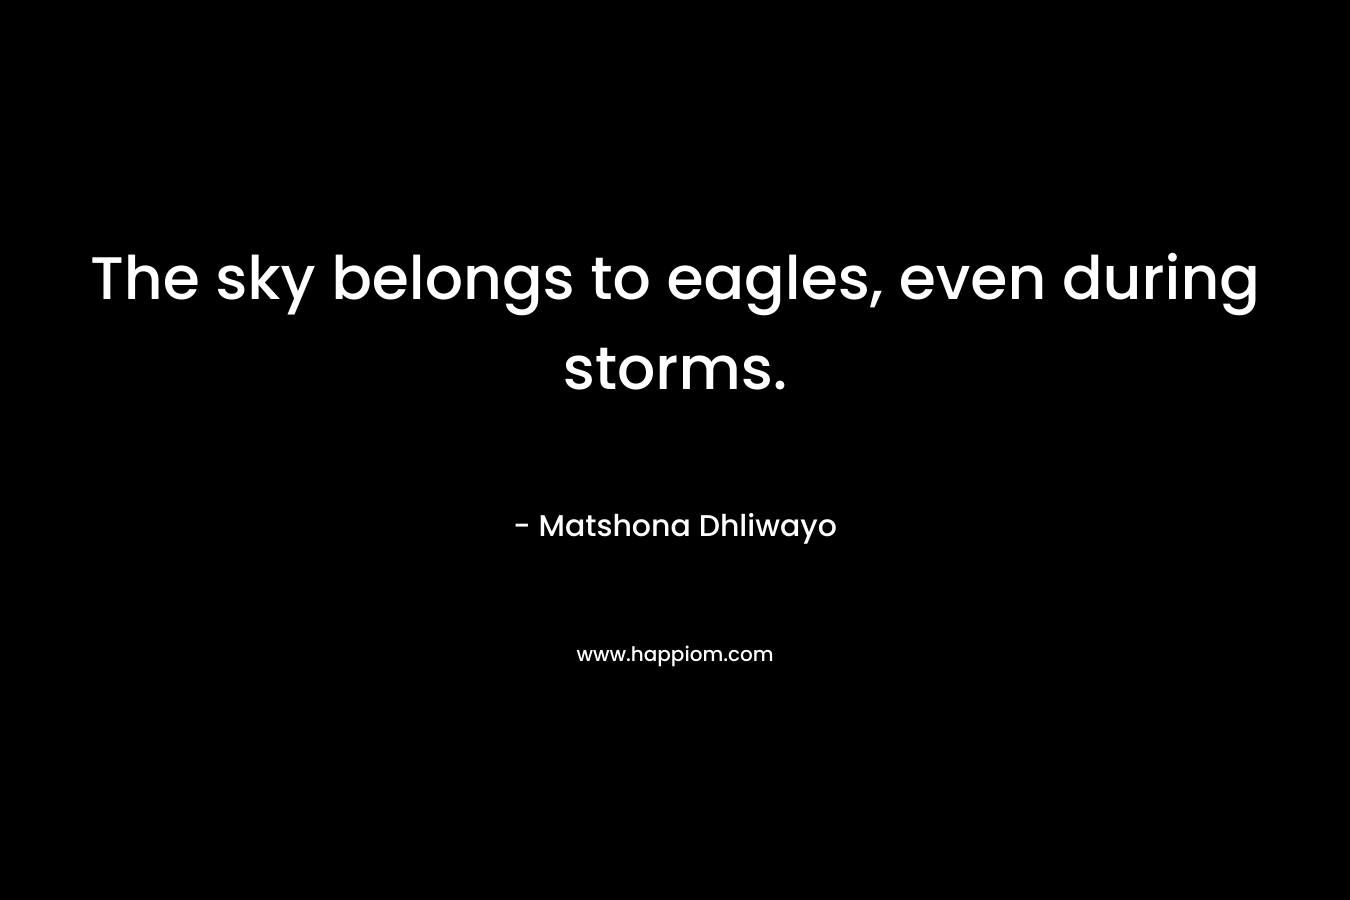 The sky belongs to eagles, even during storms.